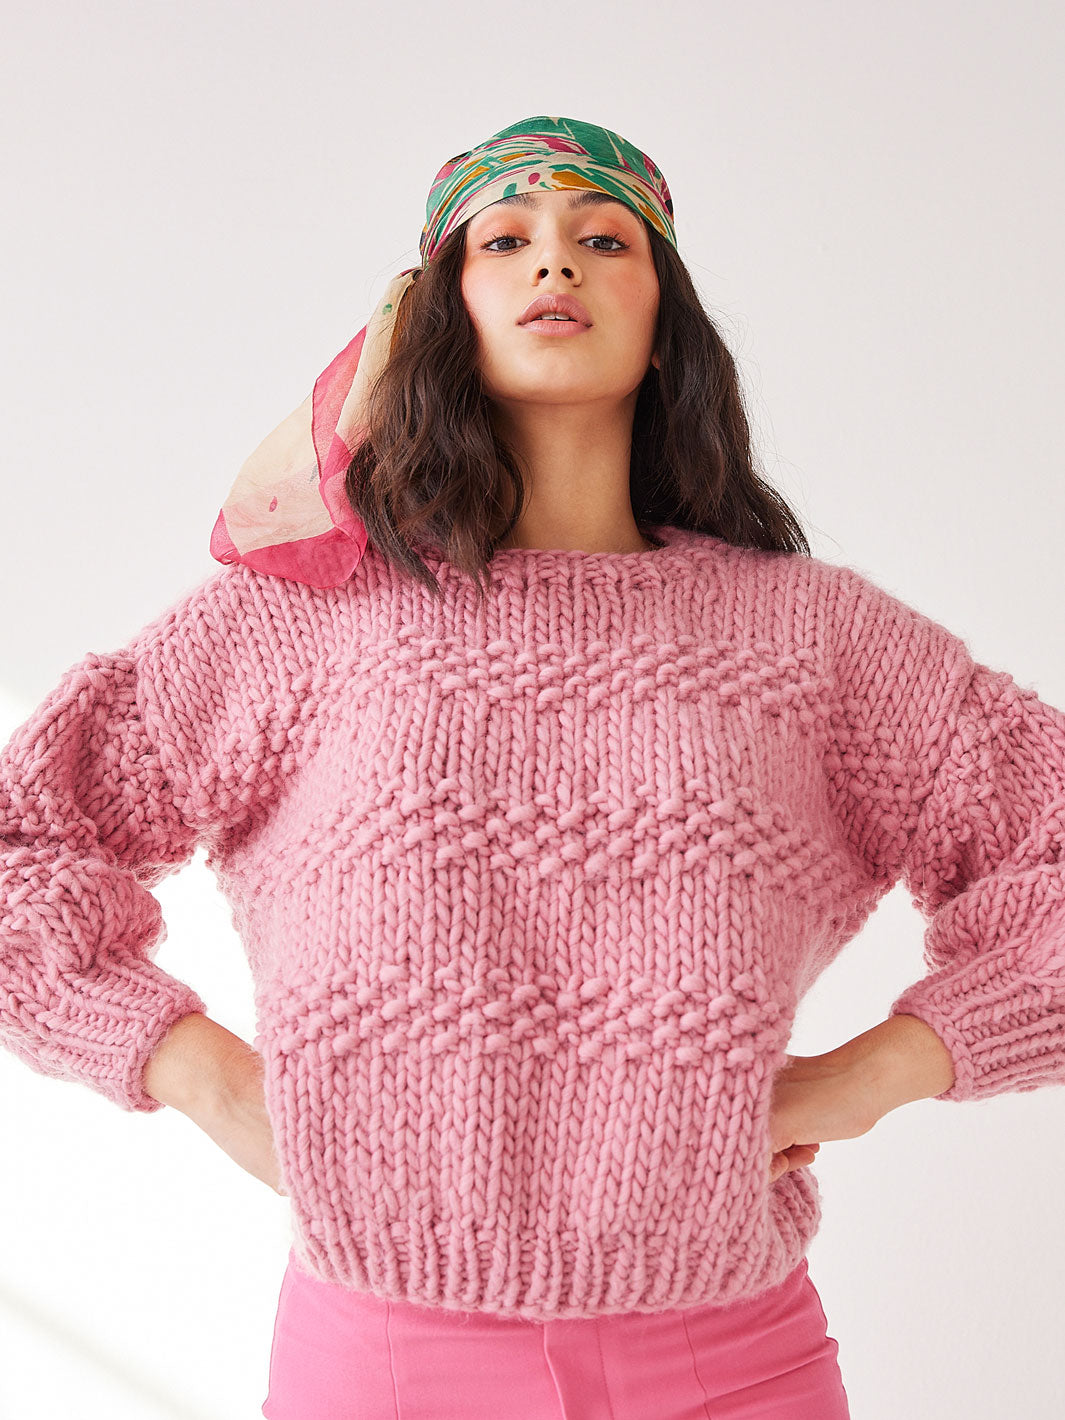 Woman stands with hands on hips. She is wearing a chunky knitted pink jumper, pink pants and a scarf on her head